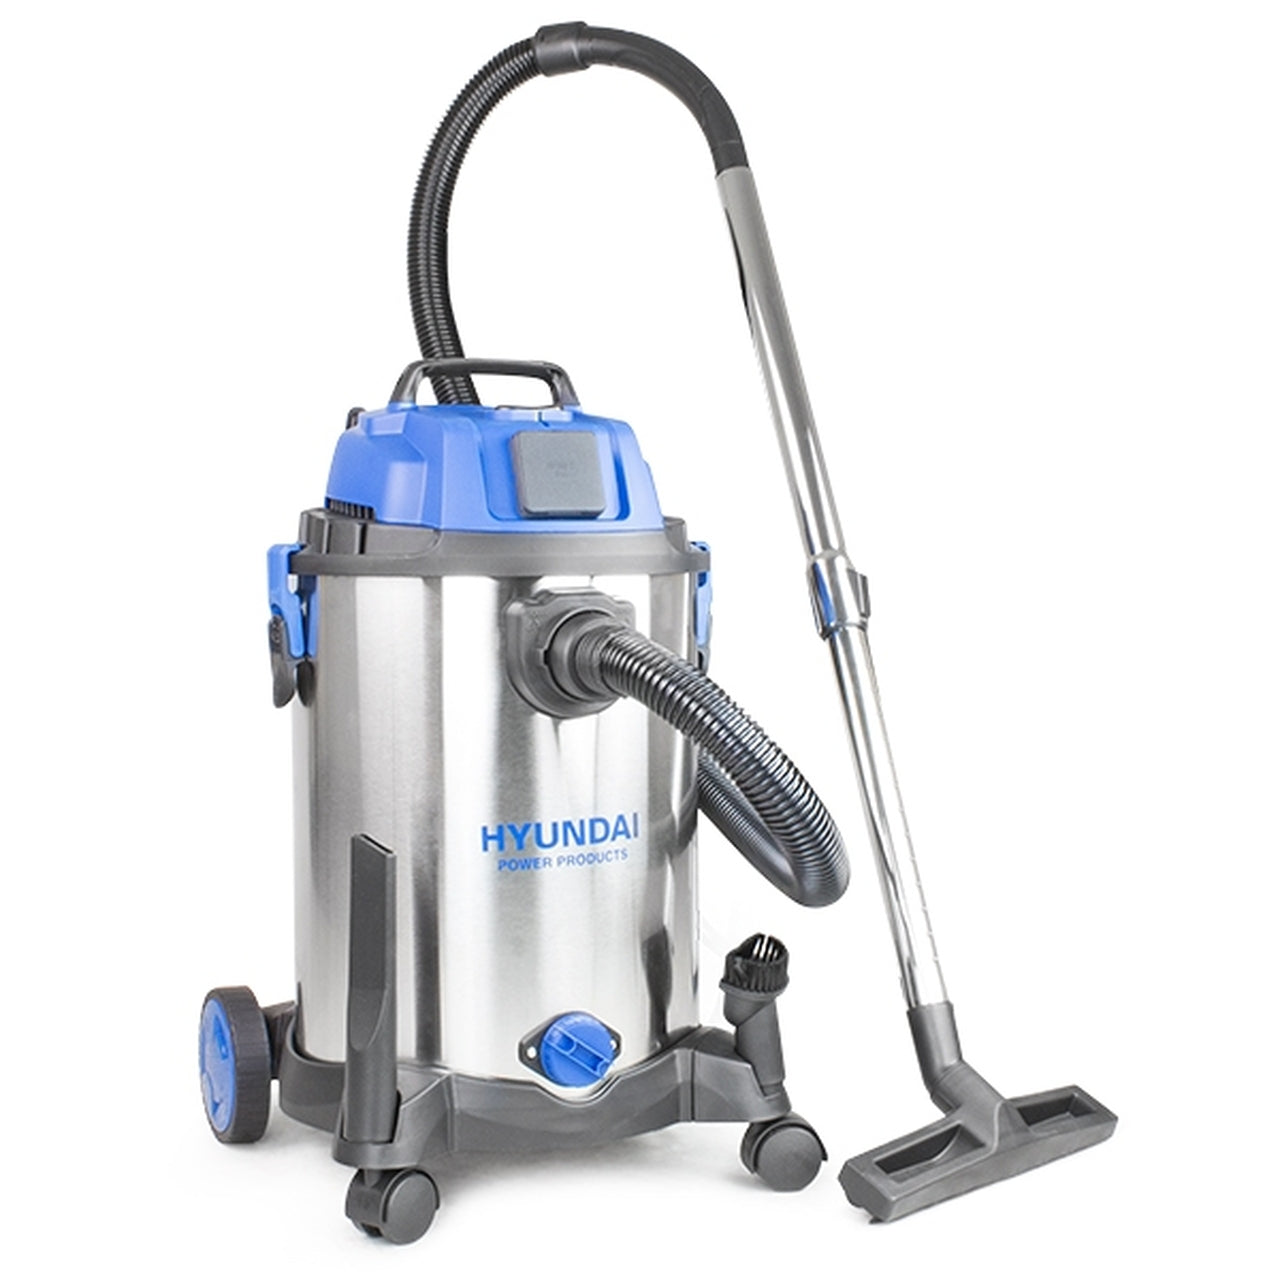 Hyundai-HYVI3014-1400W-3-In-1-Wet-and-Dry-HEPA-Filtration-Electric-Vacuum-Cleaner